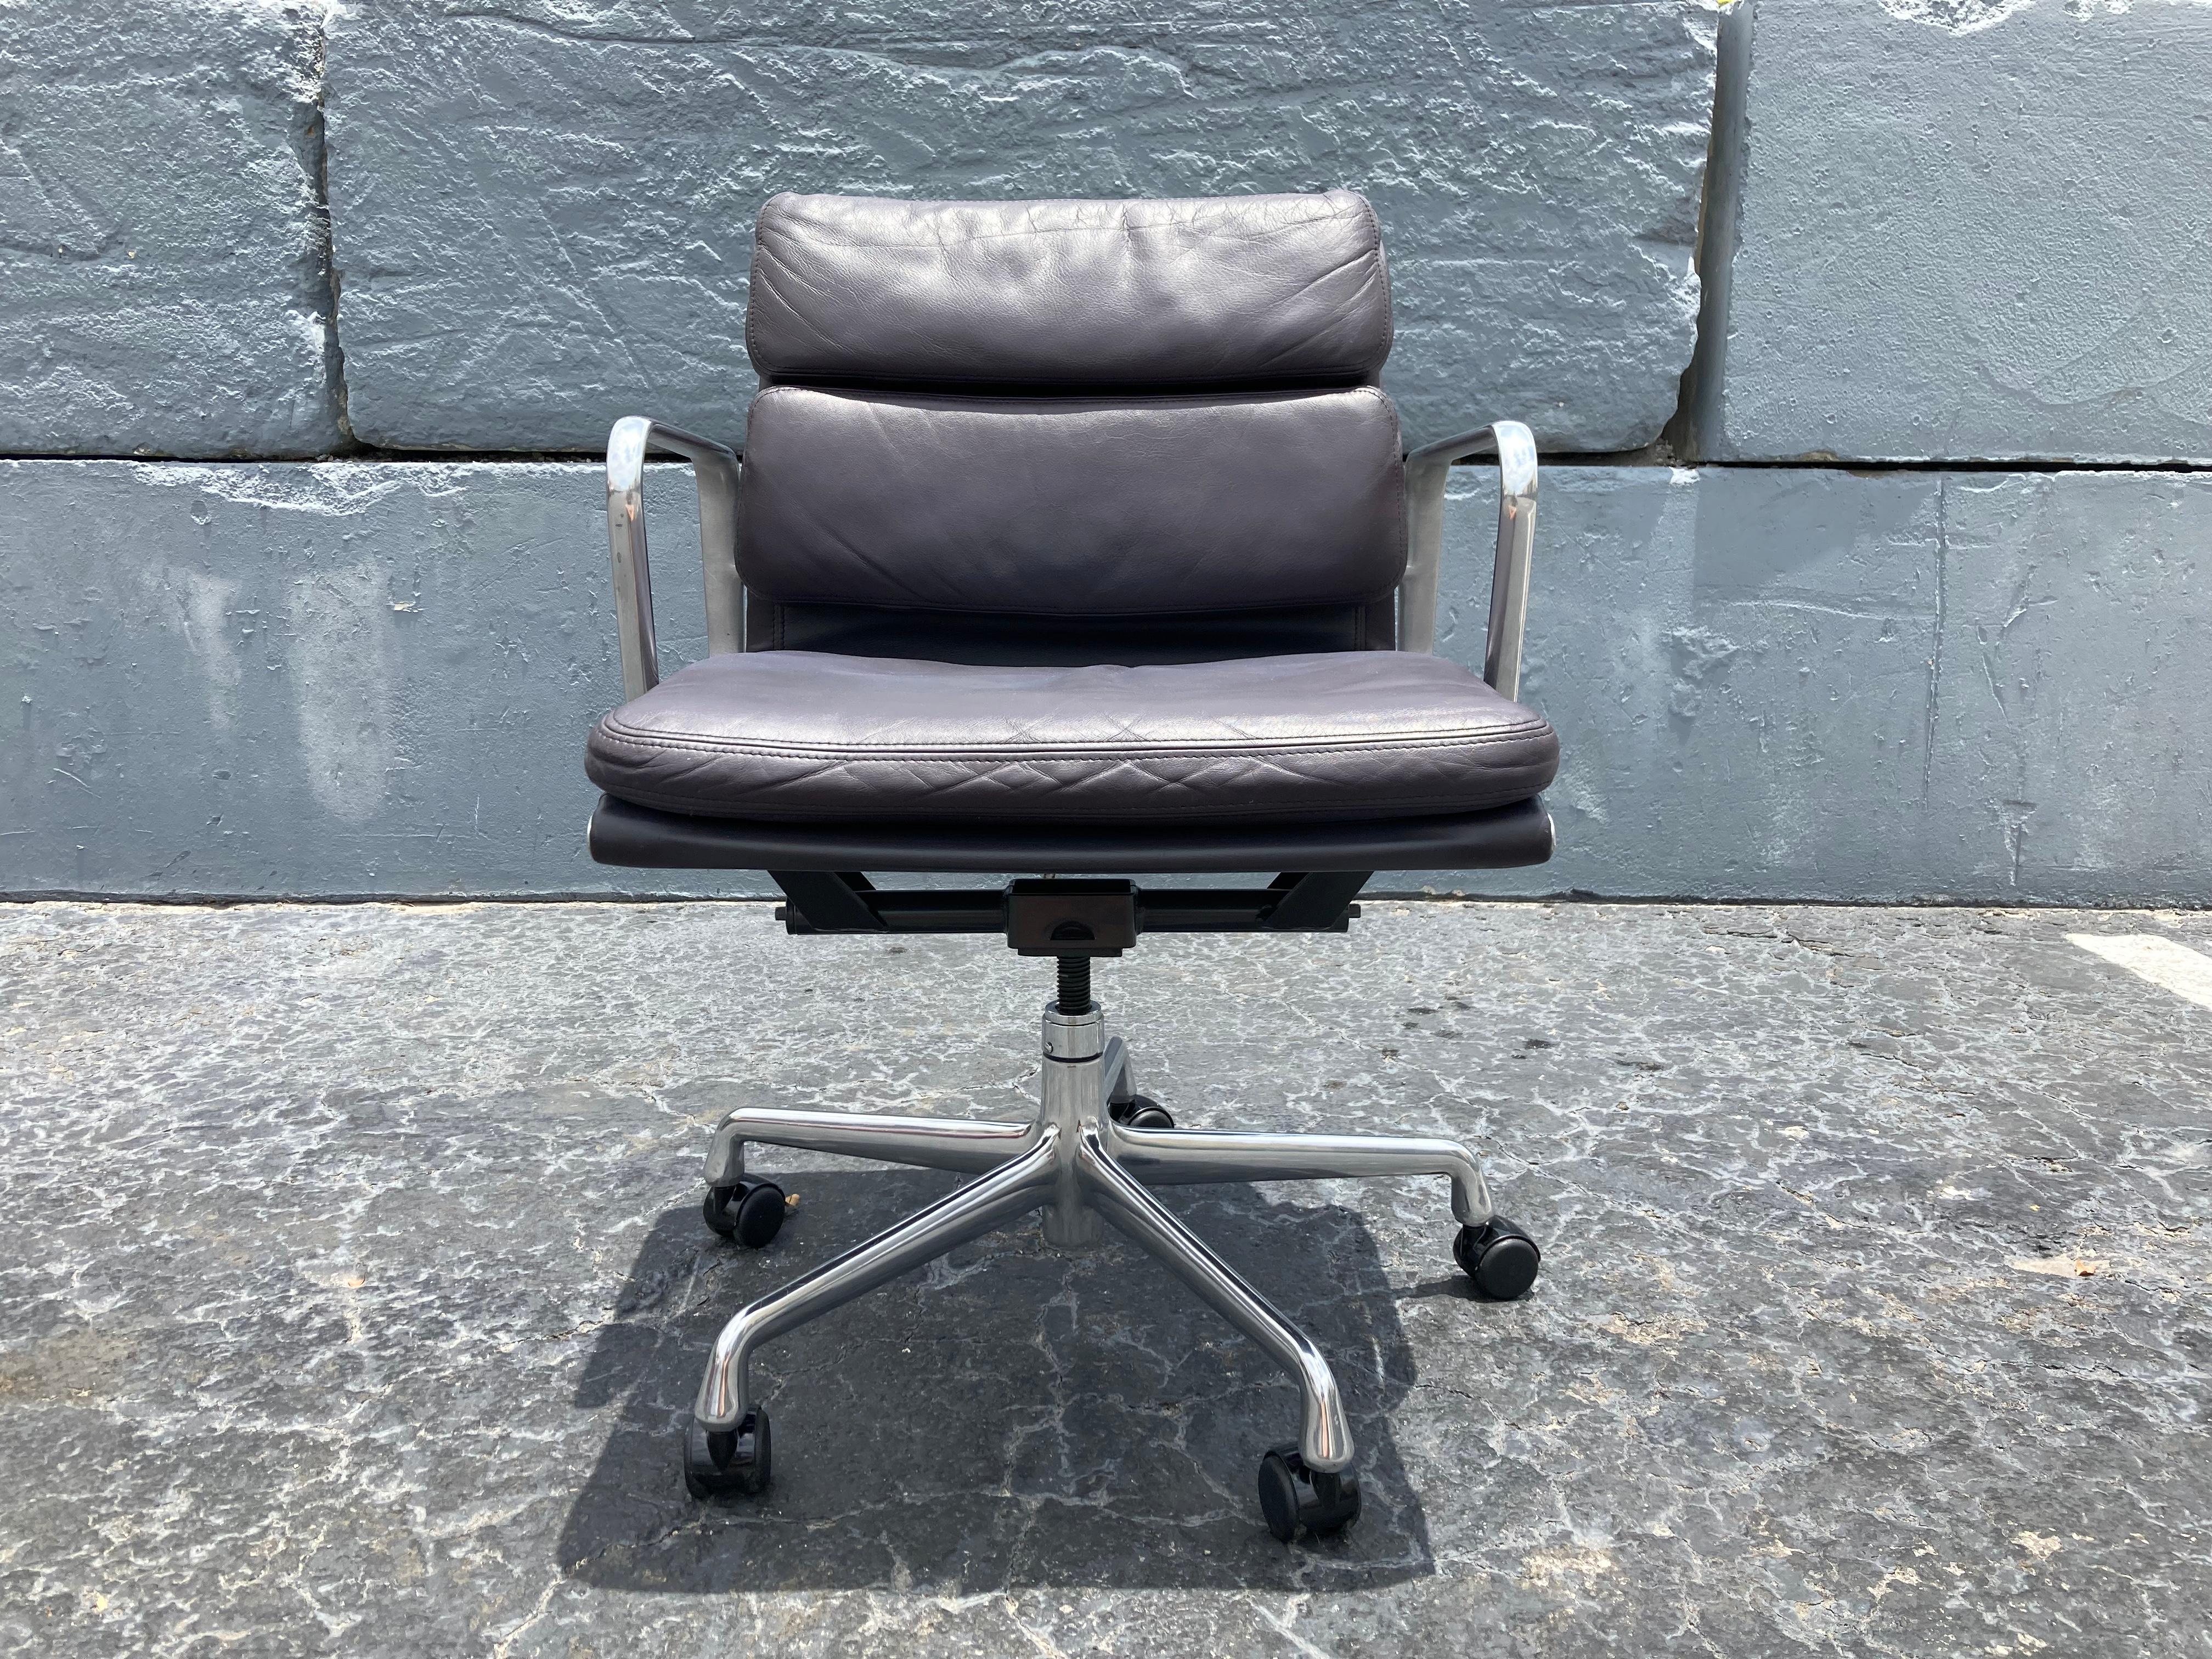 Beautiful Eames soft pad chair for Herman Miller.
Chair has a rare dark aubergine color leather, swivels, tilts and on casters.
Measures: Seat height is adjustable 19.75”, 22.50”.